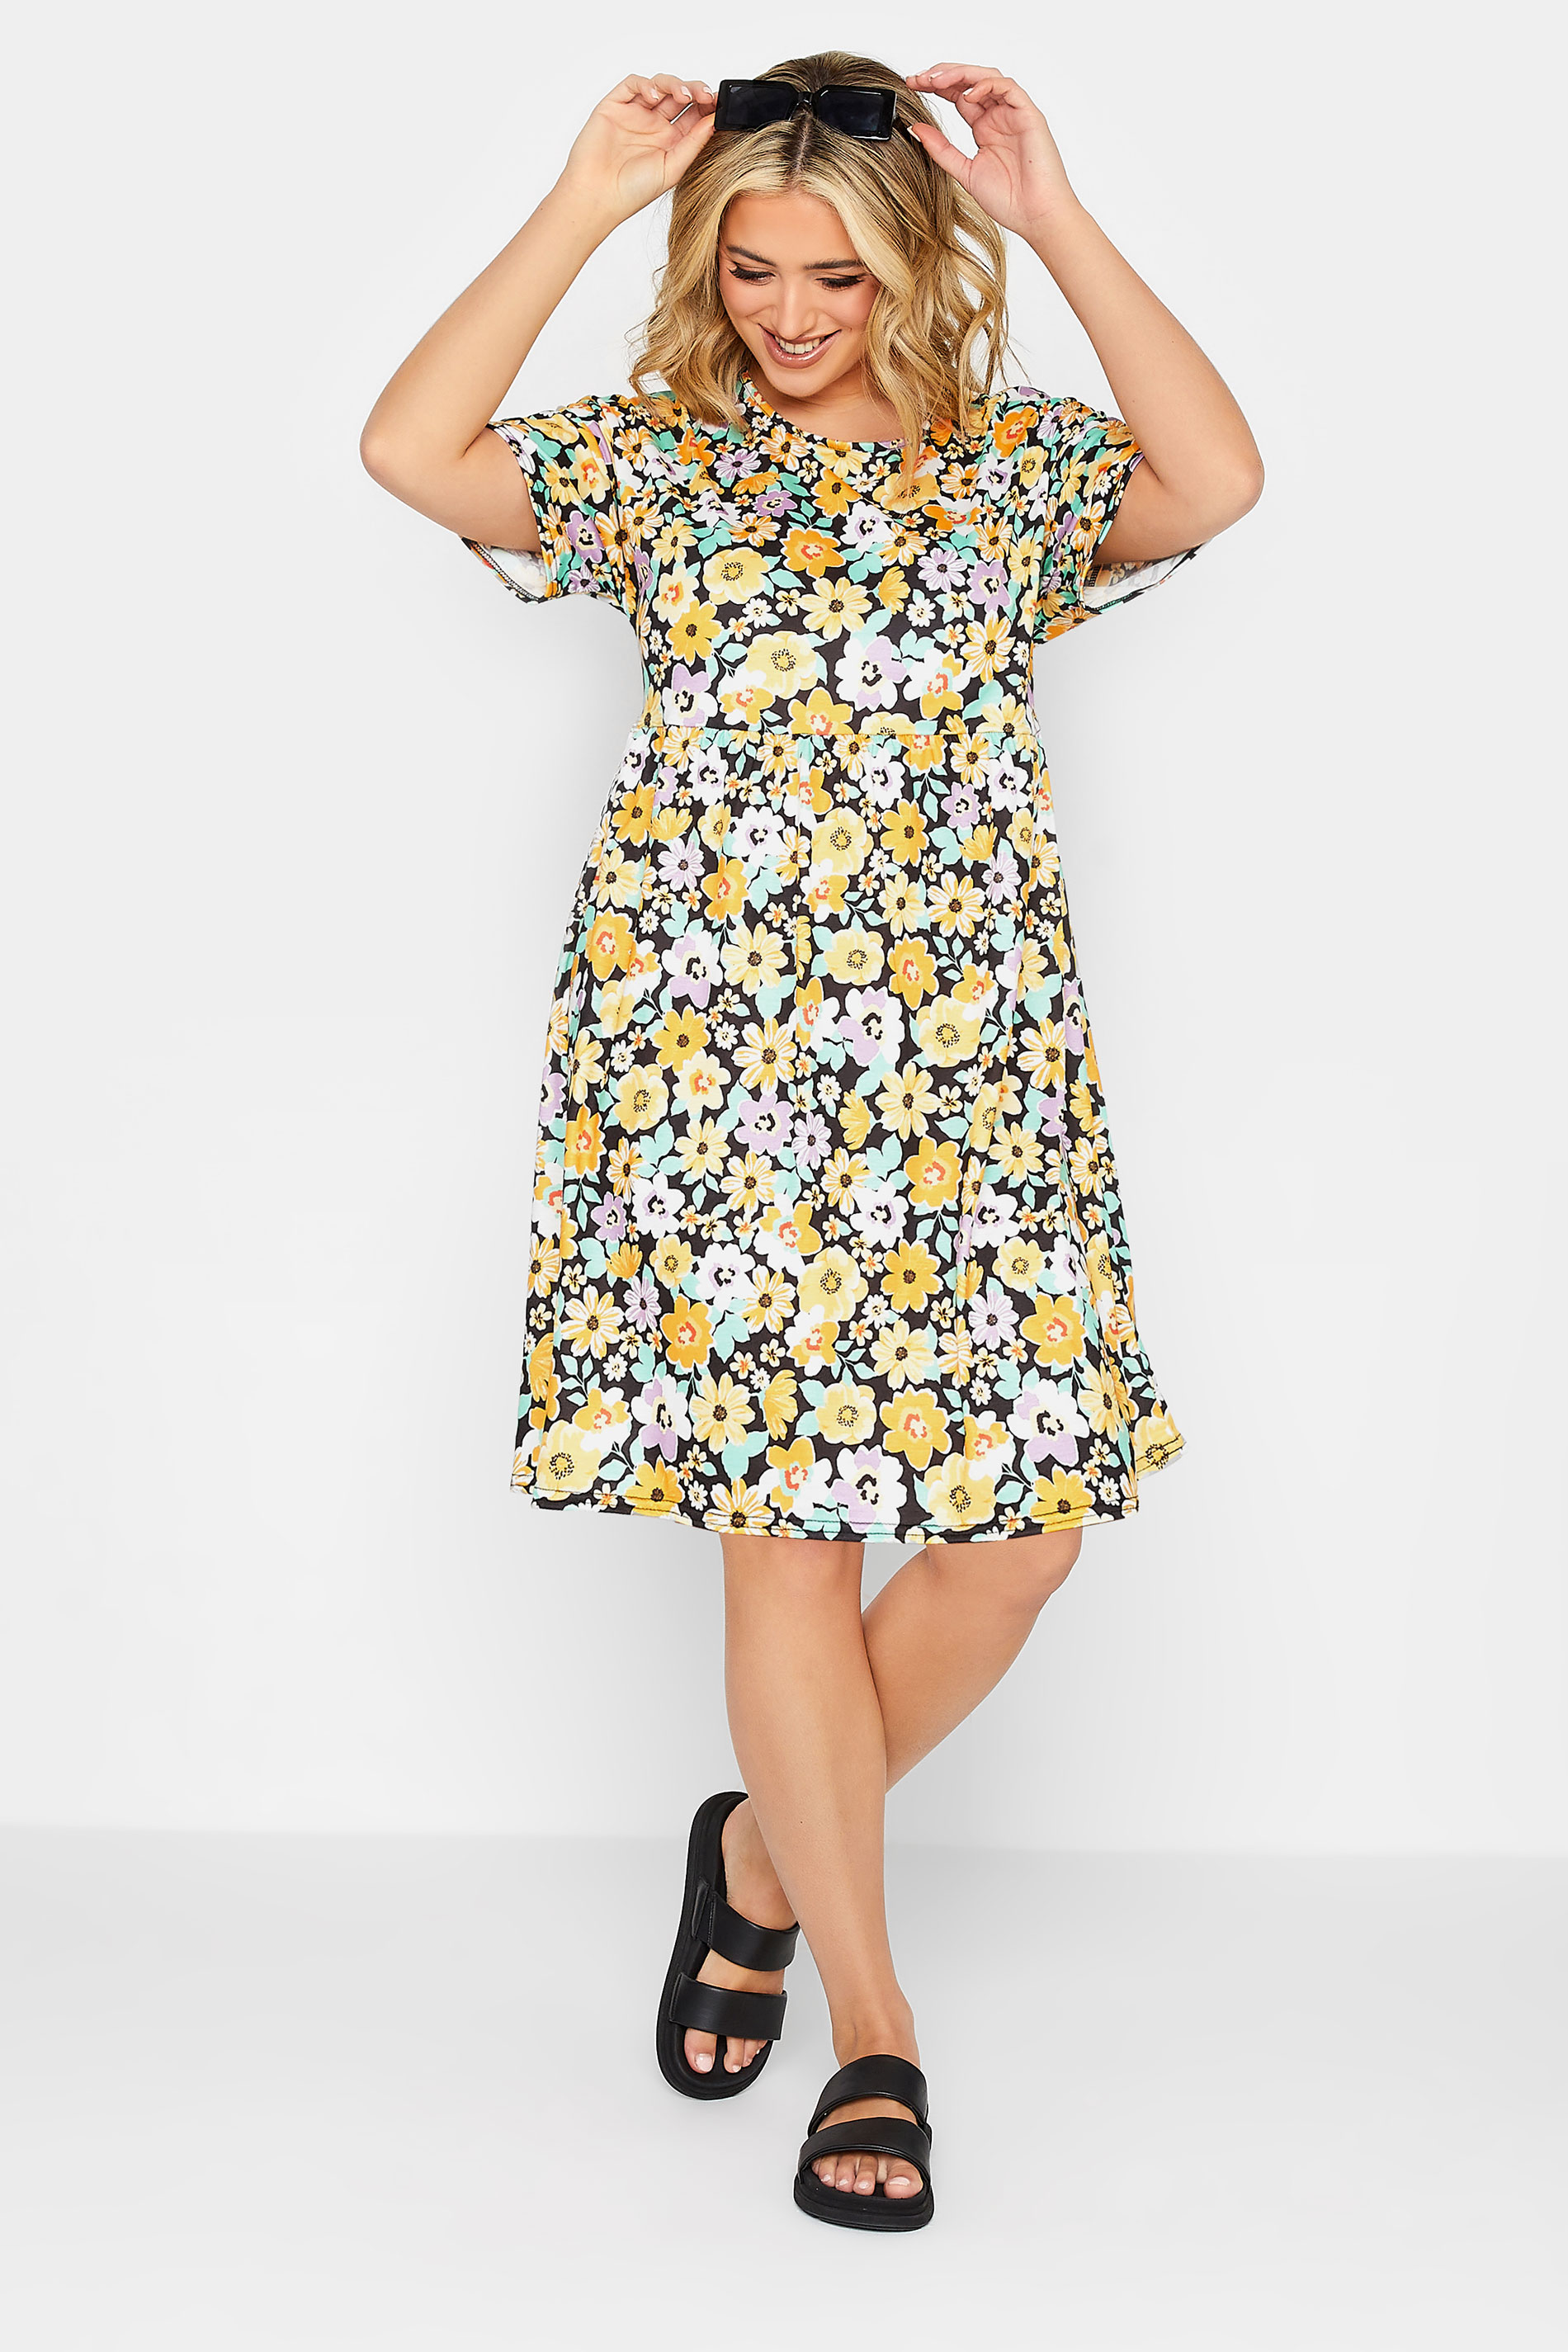 YOURS PETITE Plus Size Yellow Floral Print Smock Dress | Yours Clothing 3